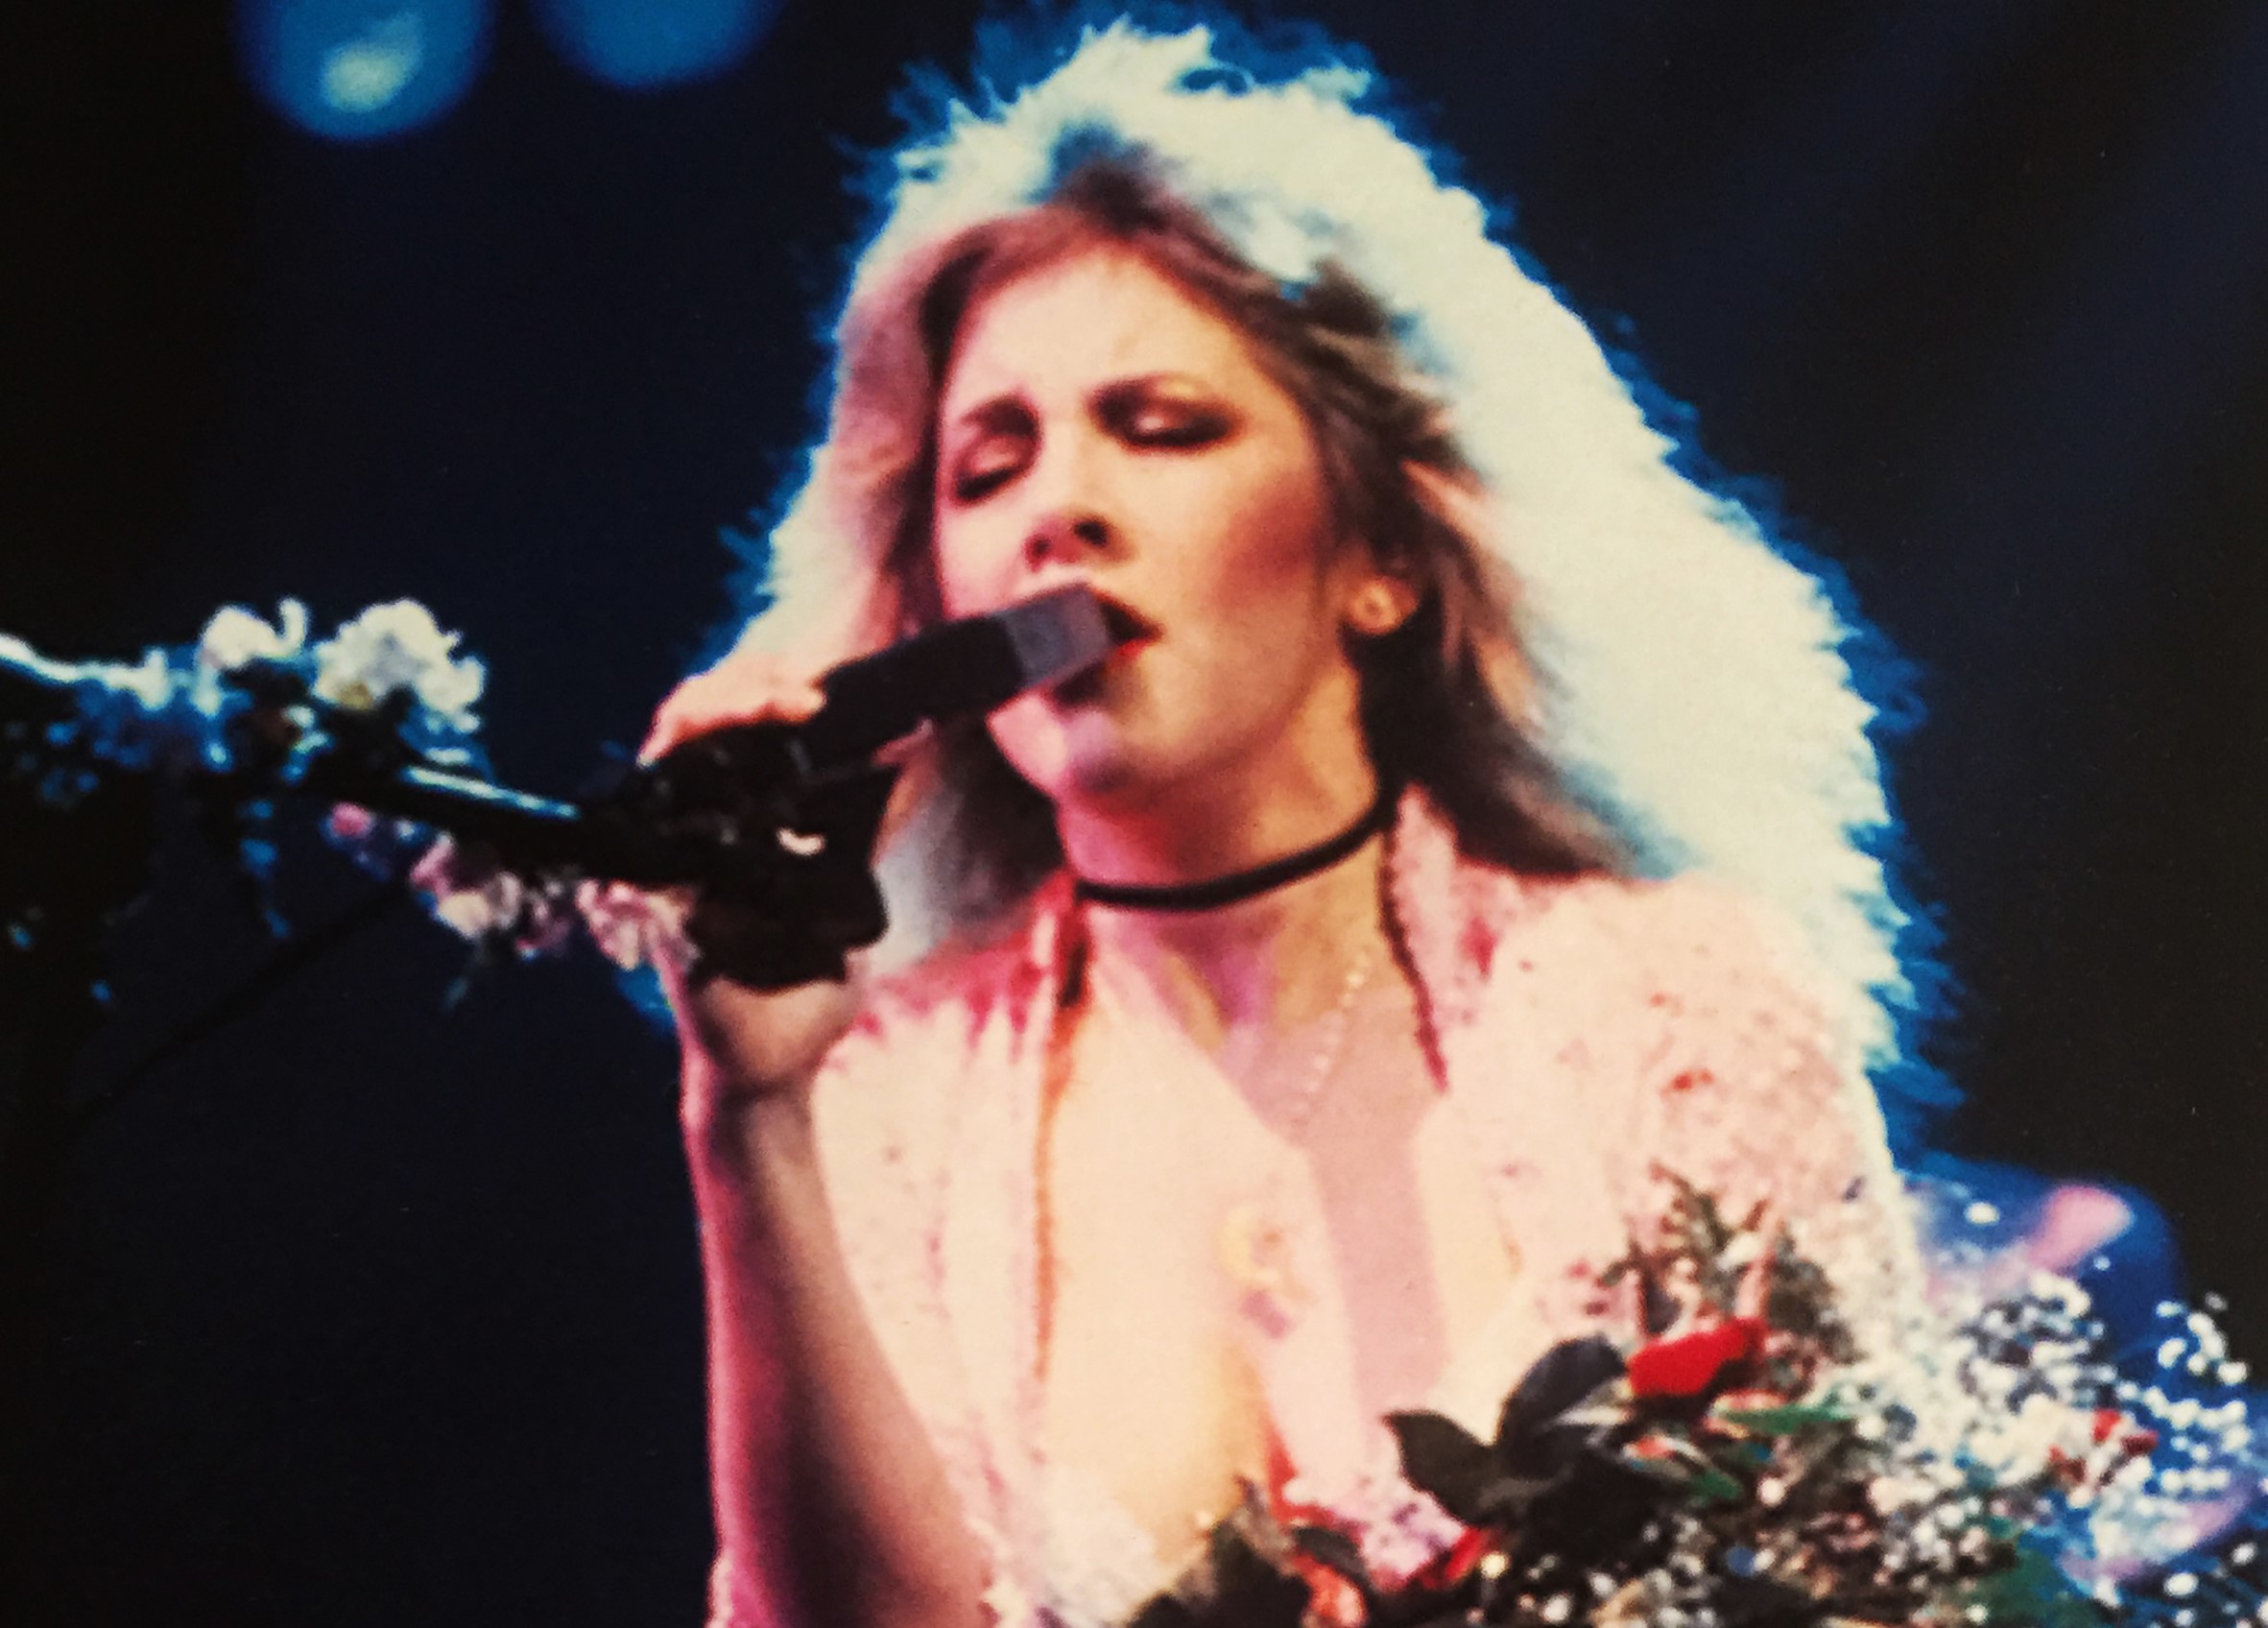 Stevie Nicks sings into a microphone and holds a bouquet of flowers.